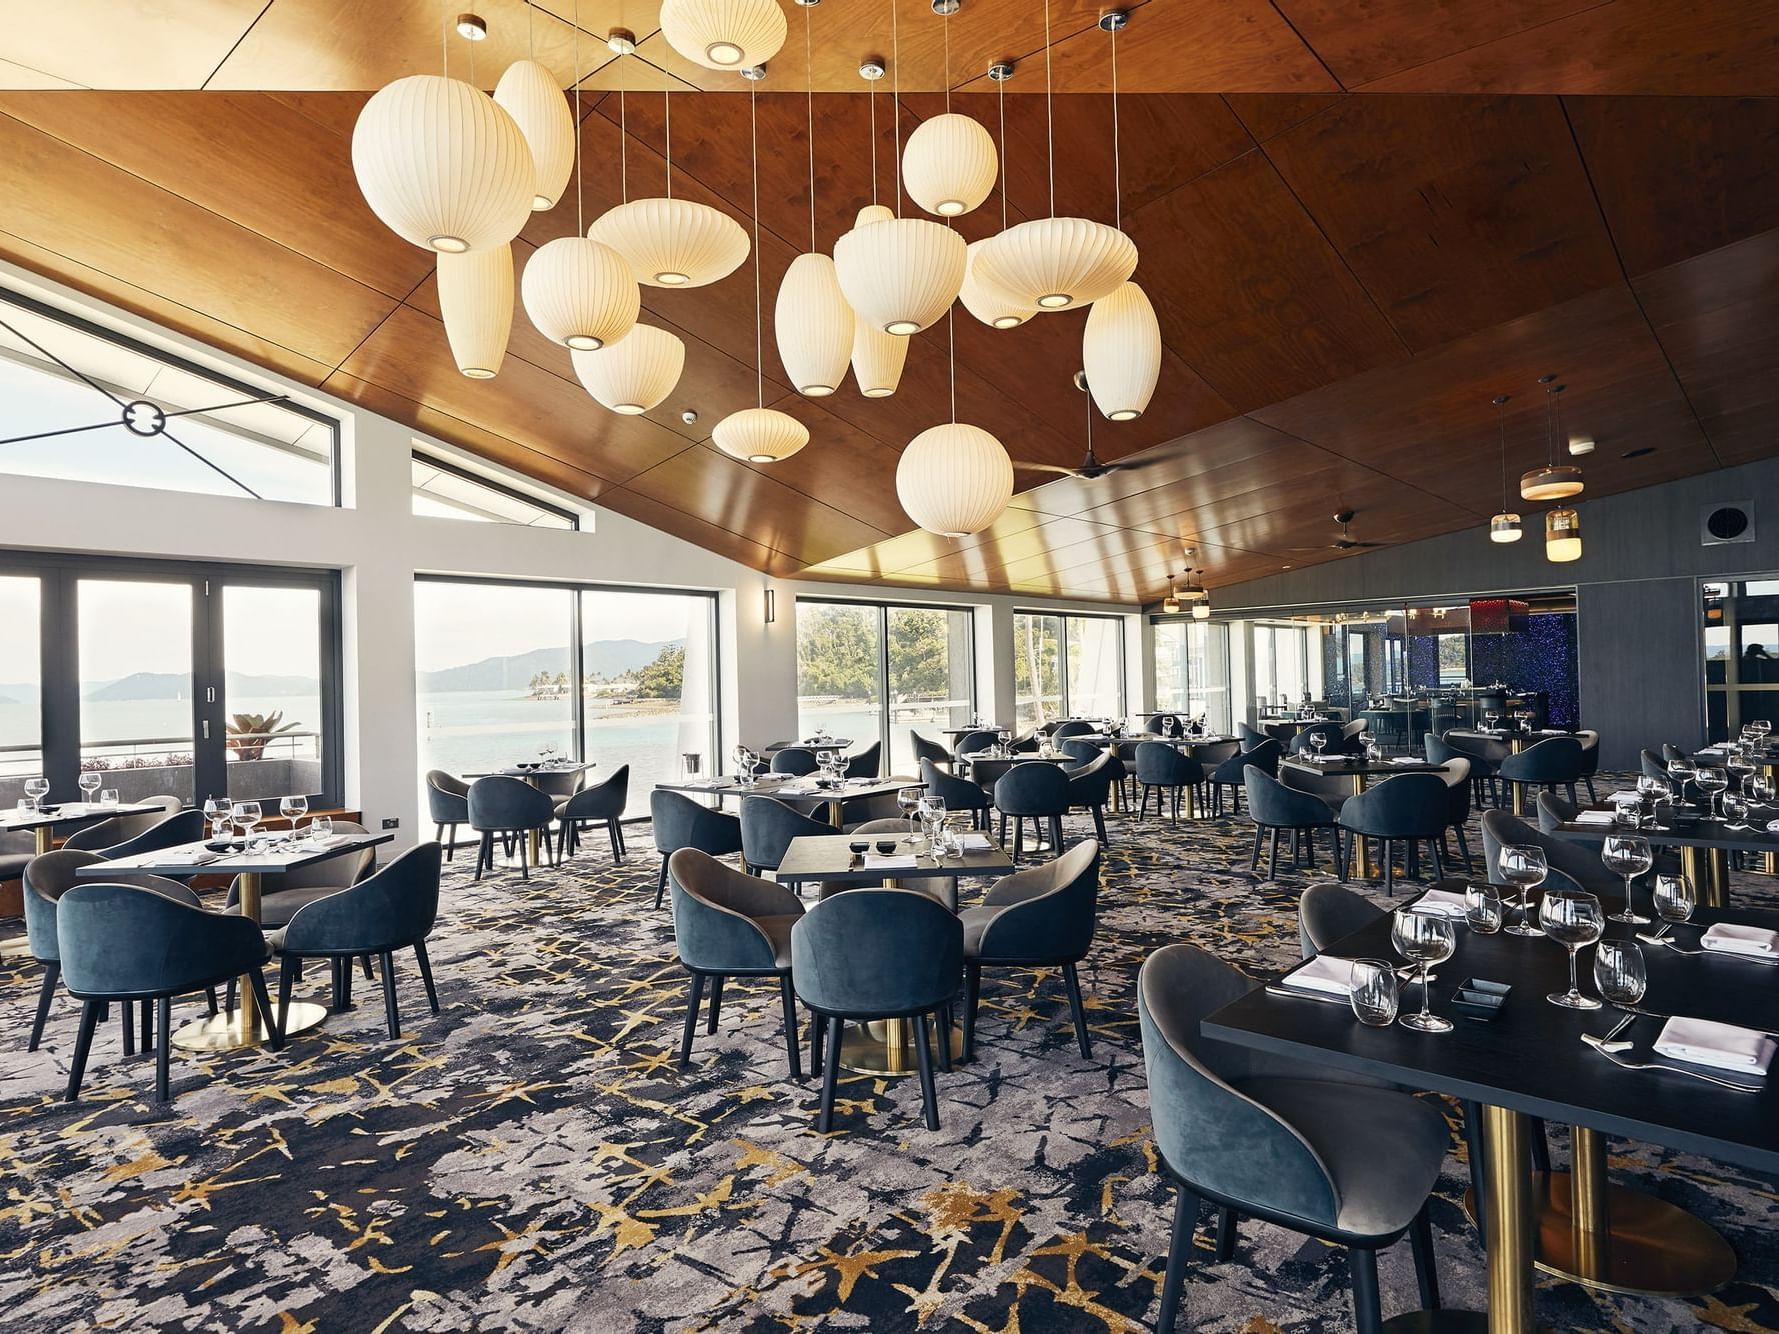 Infinity Restaurant with sea view at Daydream Island Resort